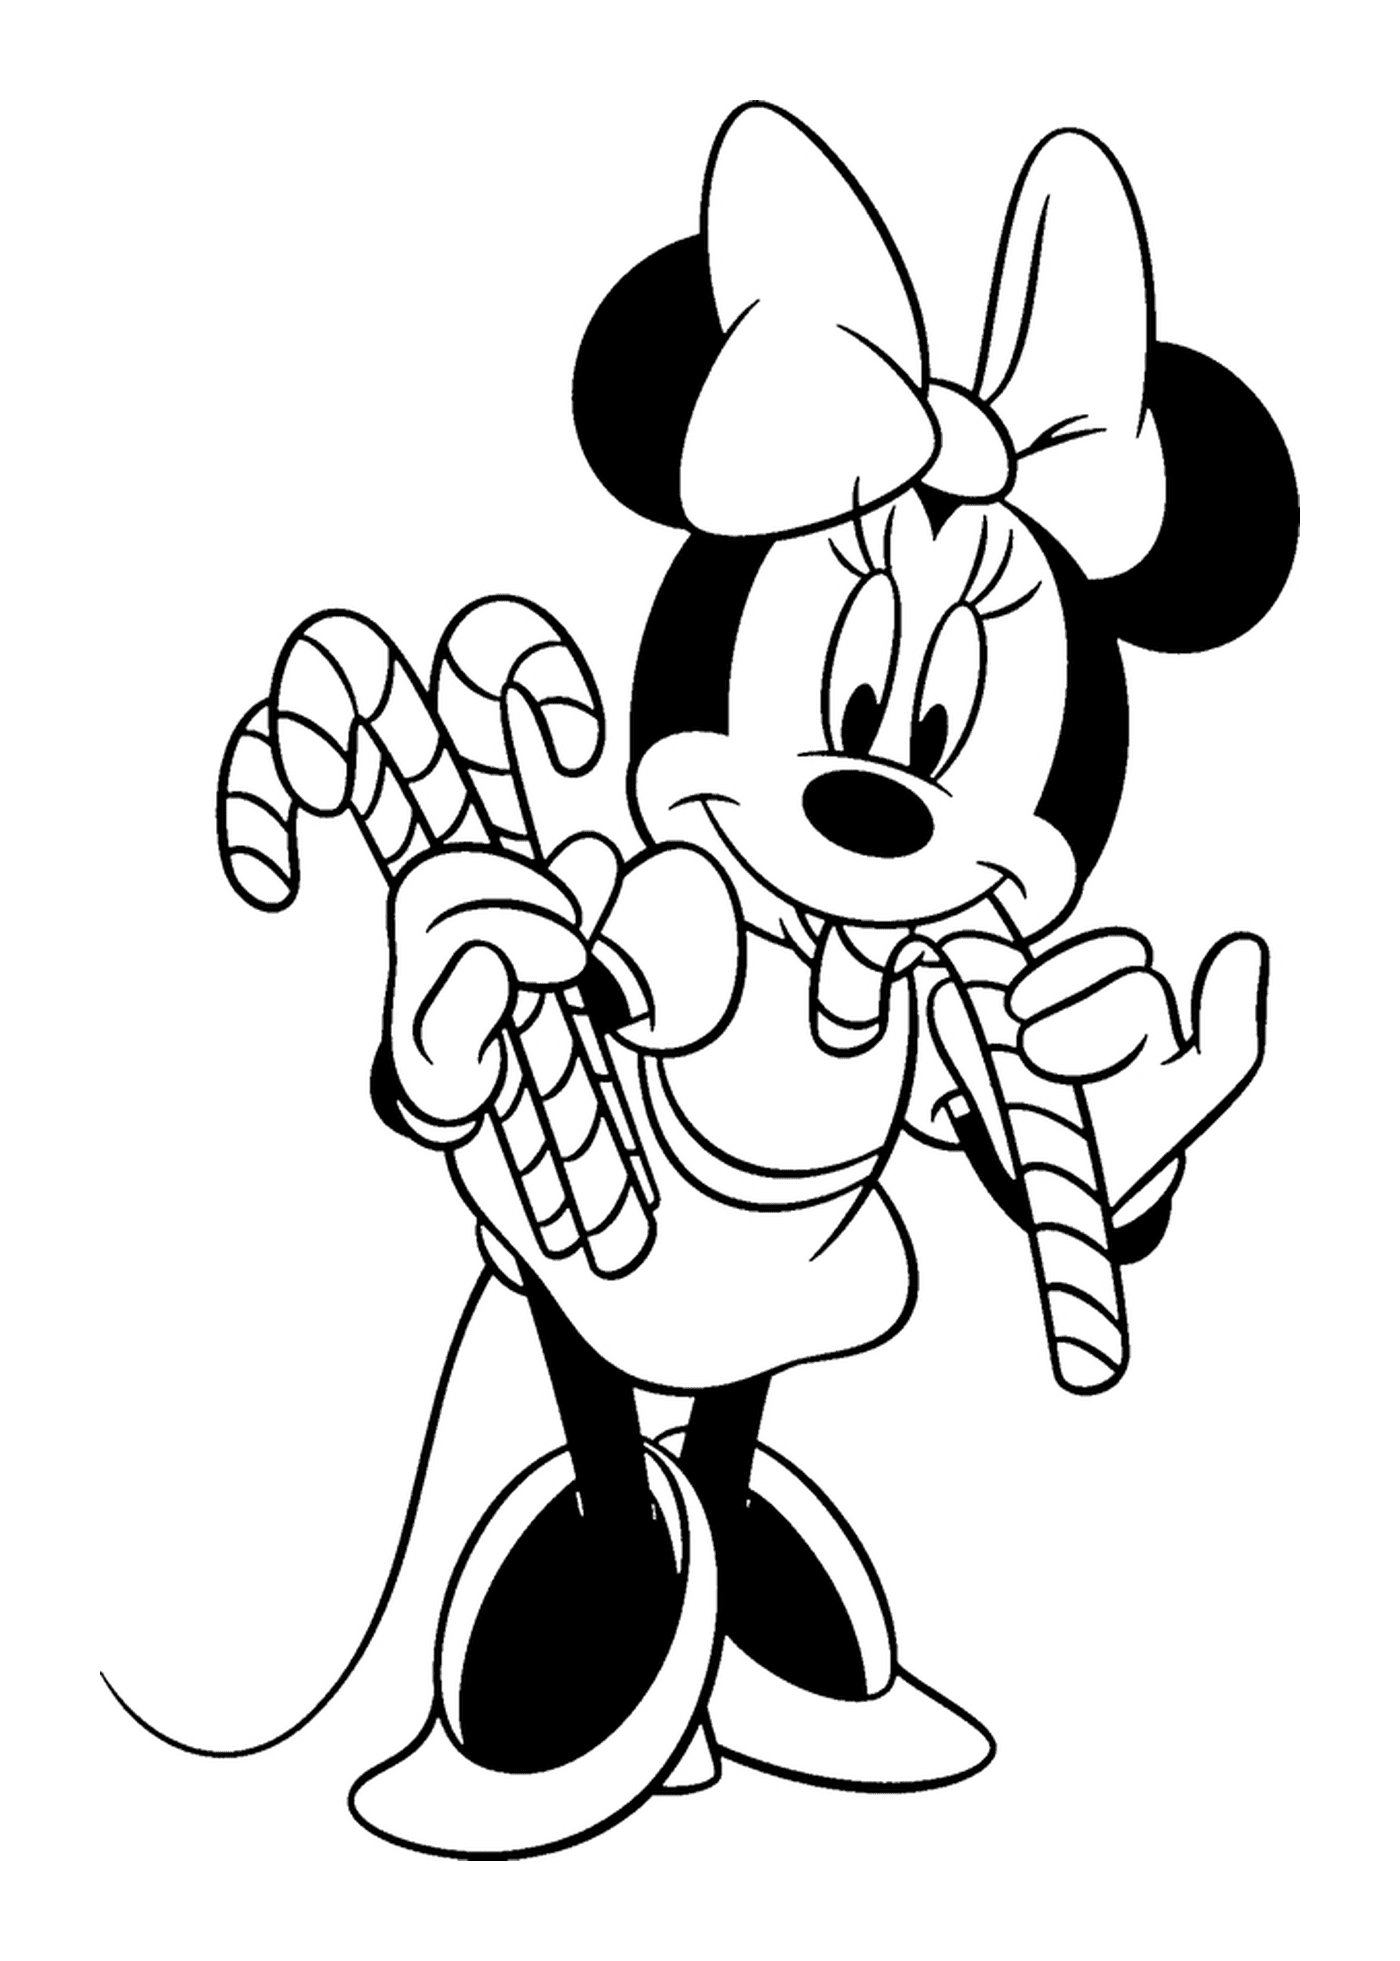  Minnie holds candy canes 